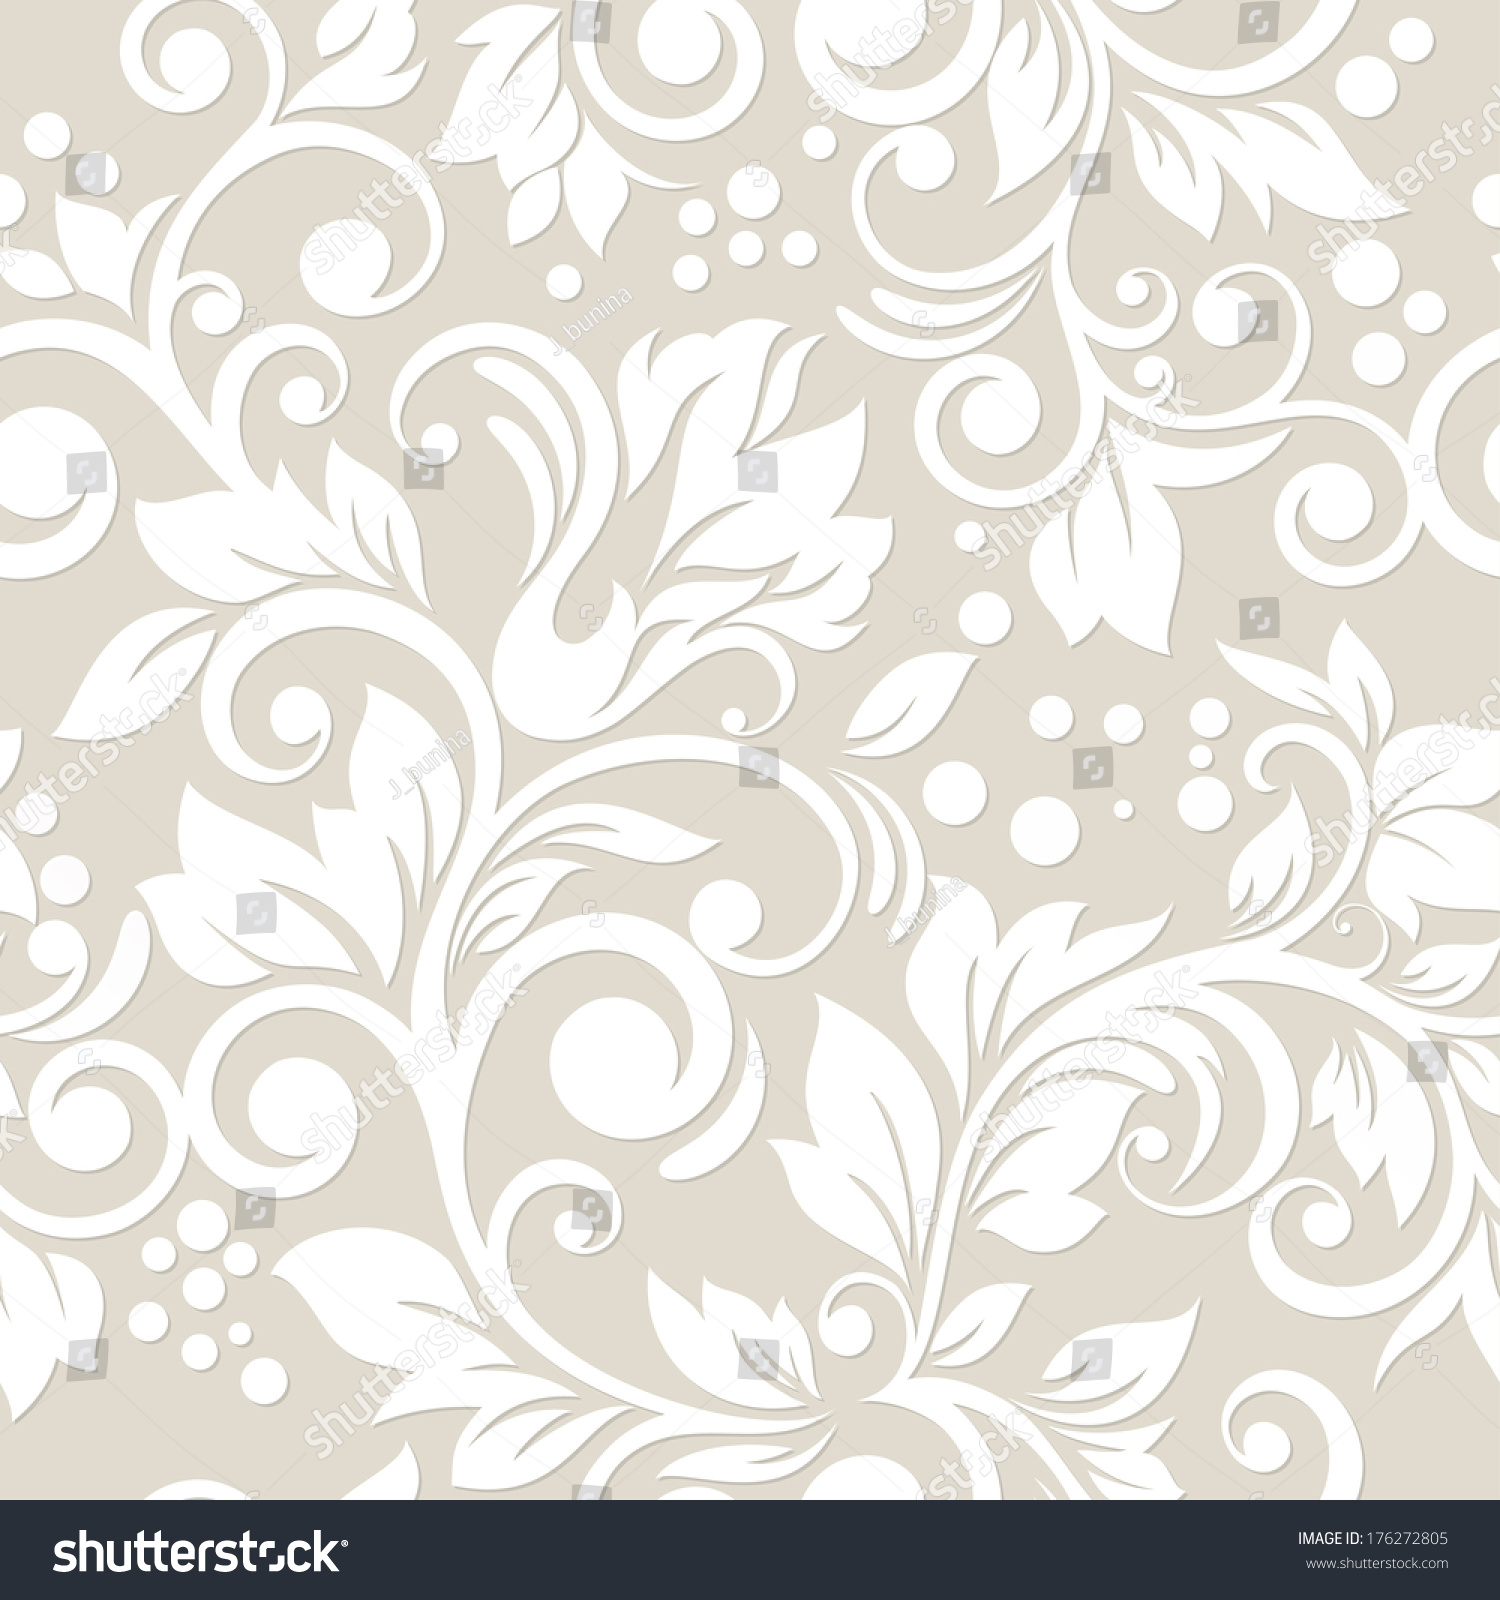 Seamless Pattern Flowers Leaves Floral Ornament Stock Vector (Royalty ...